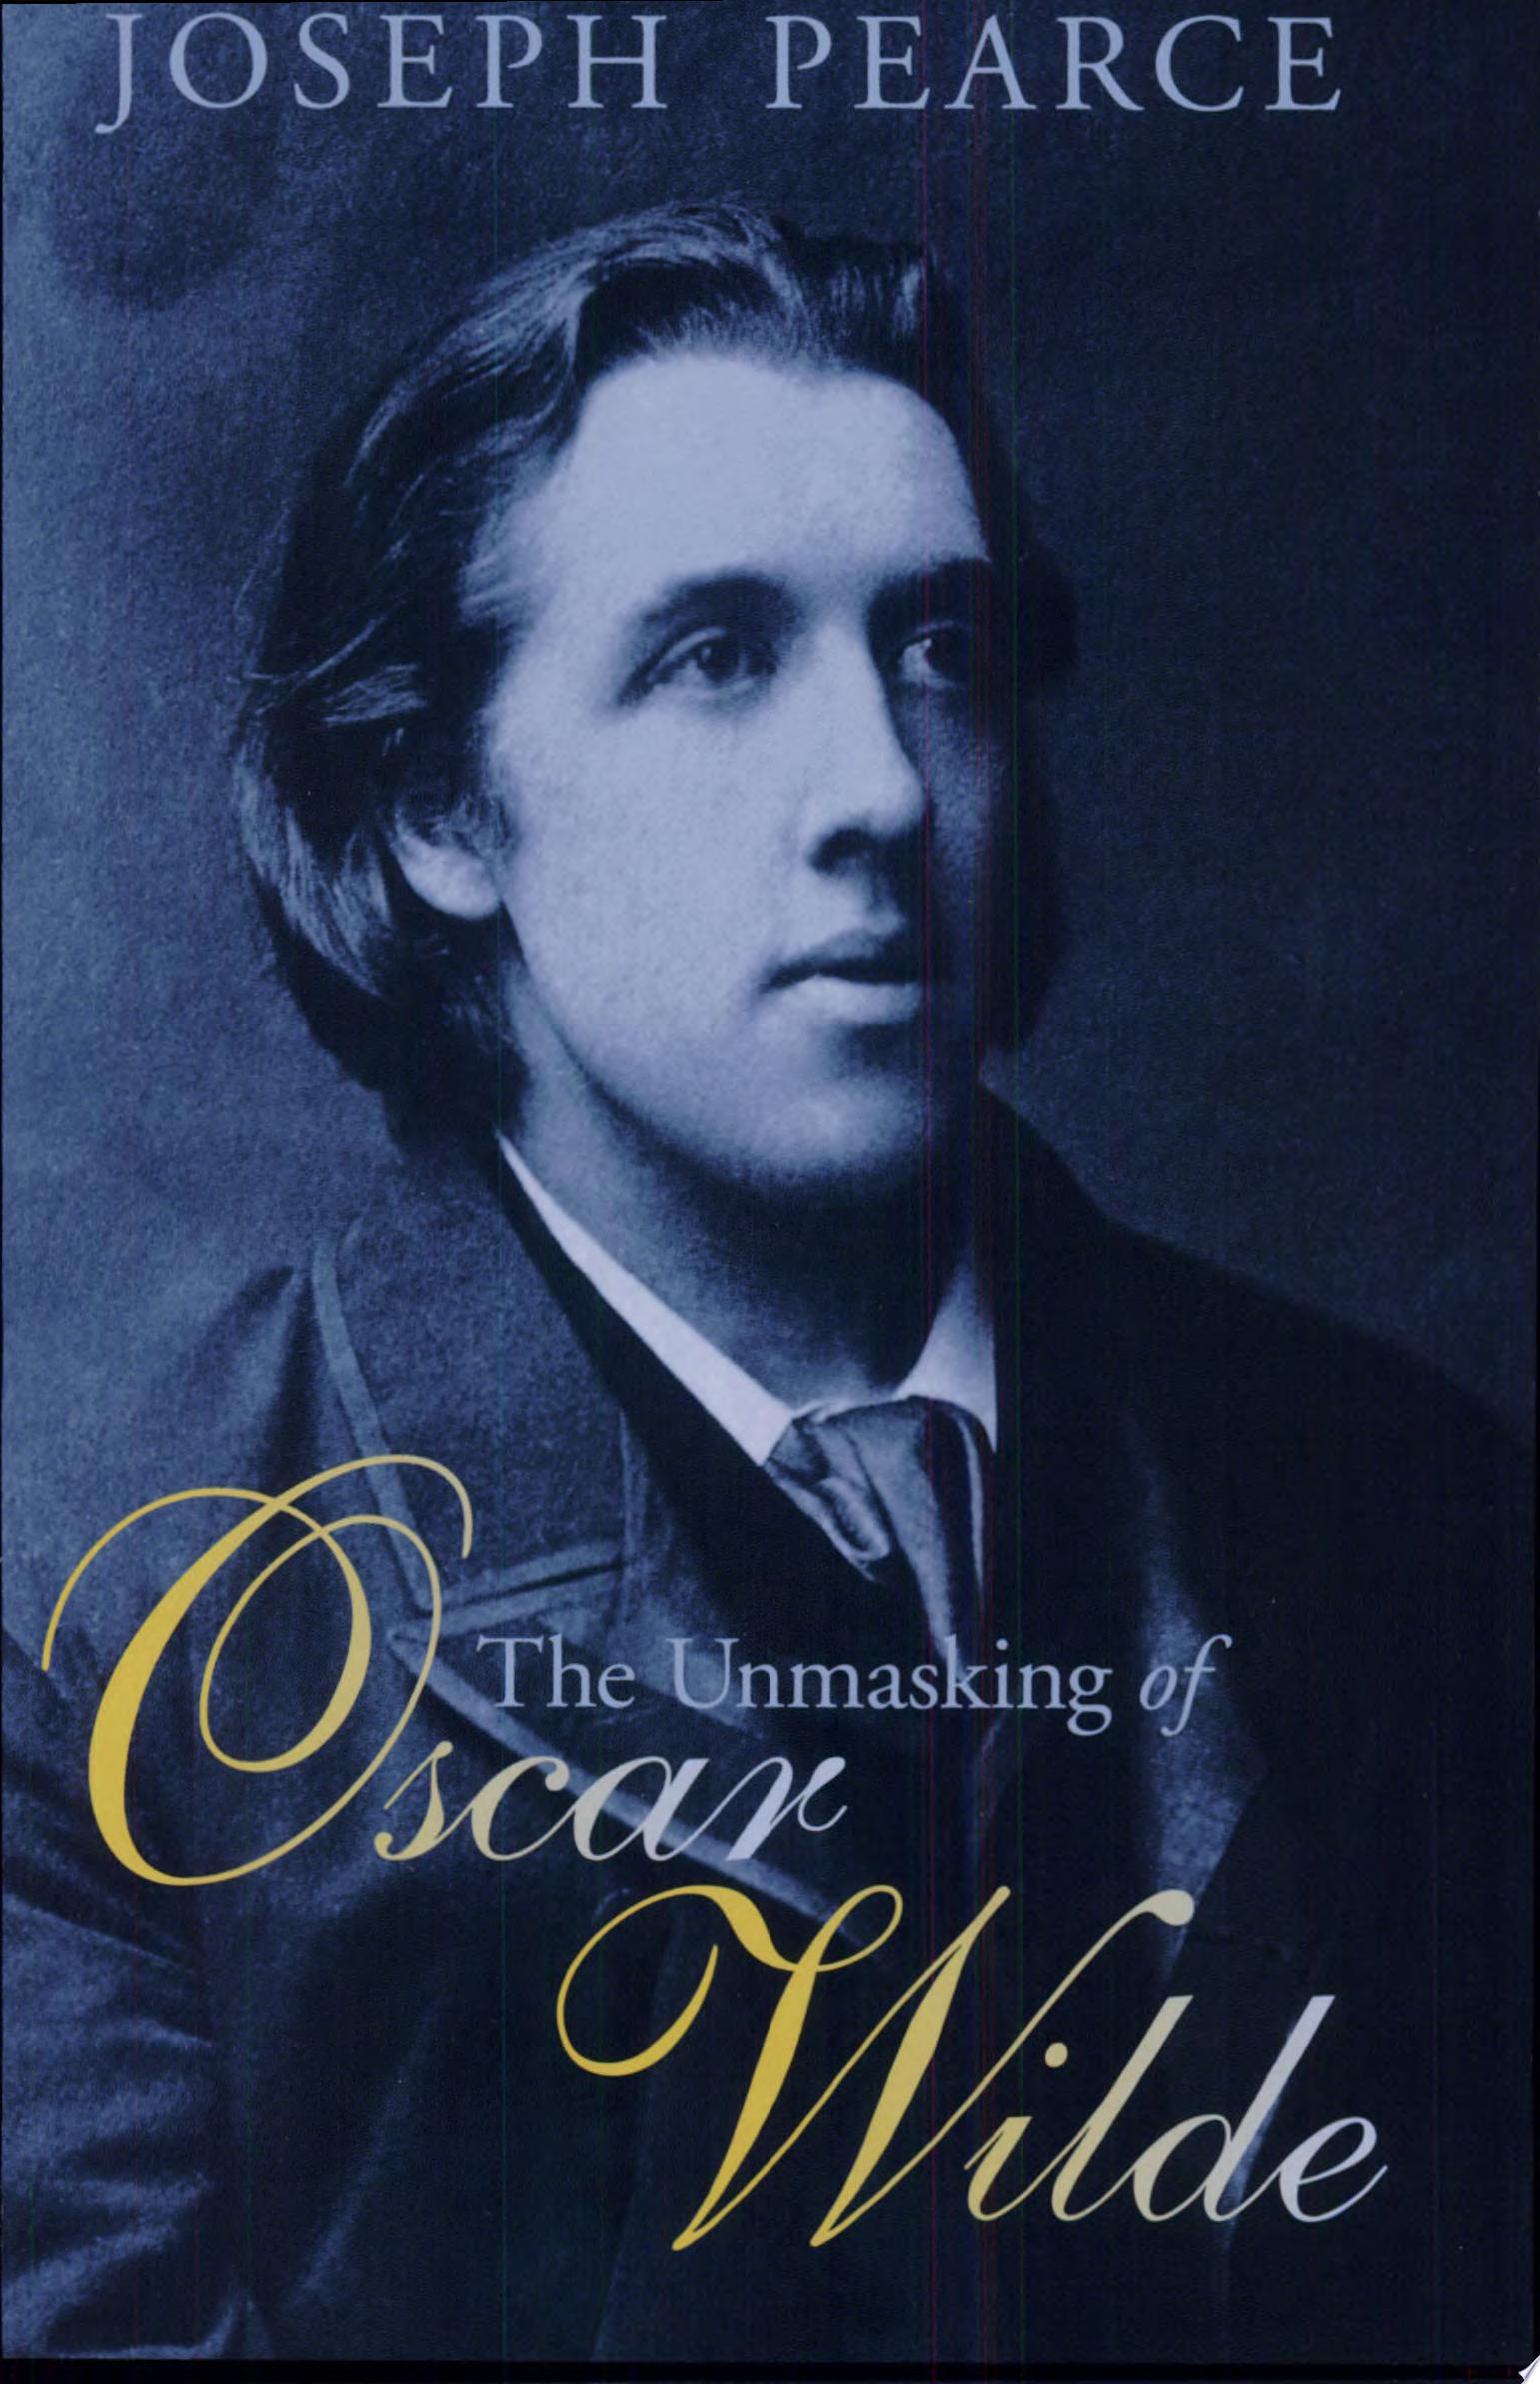 Image for "The Unmasking of Oscar Wilde"